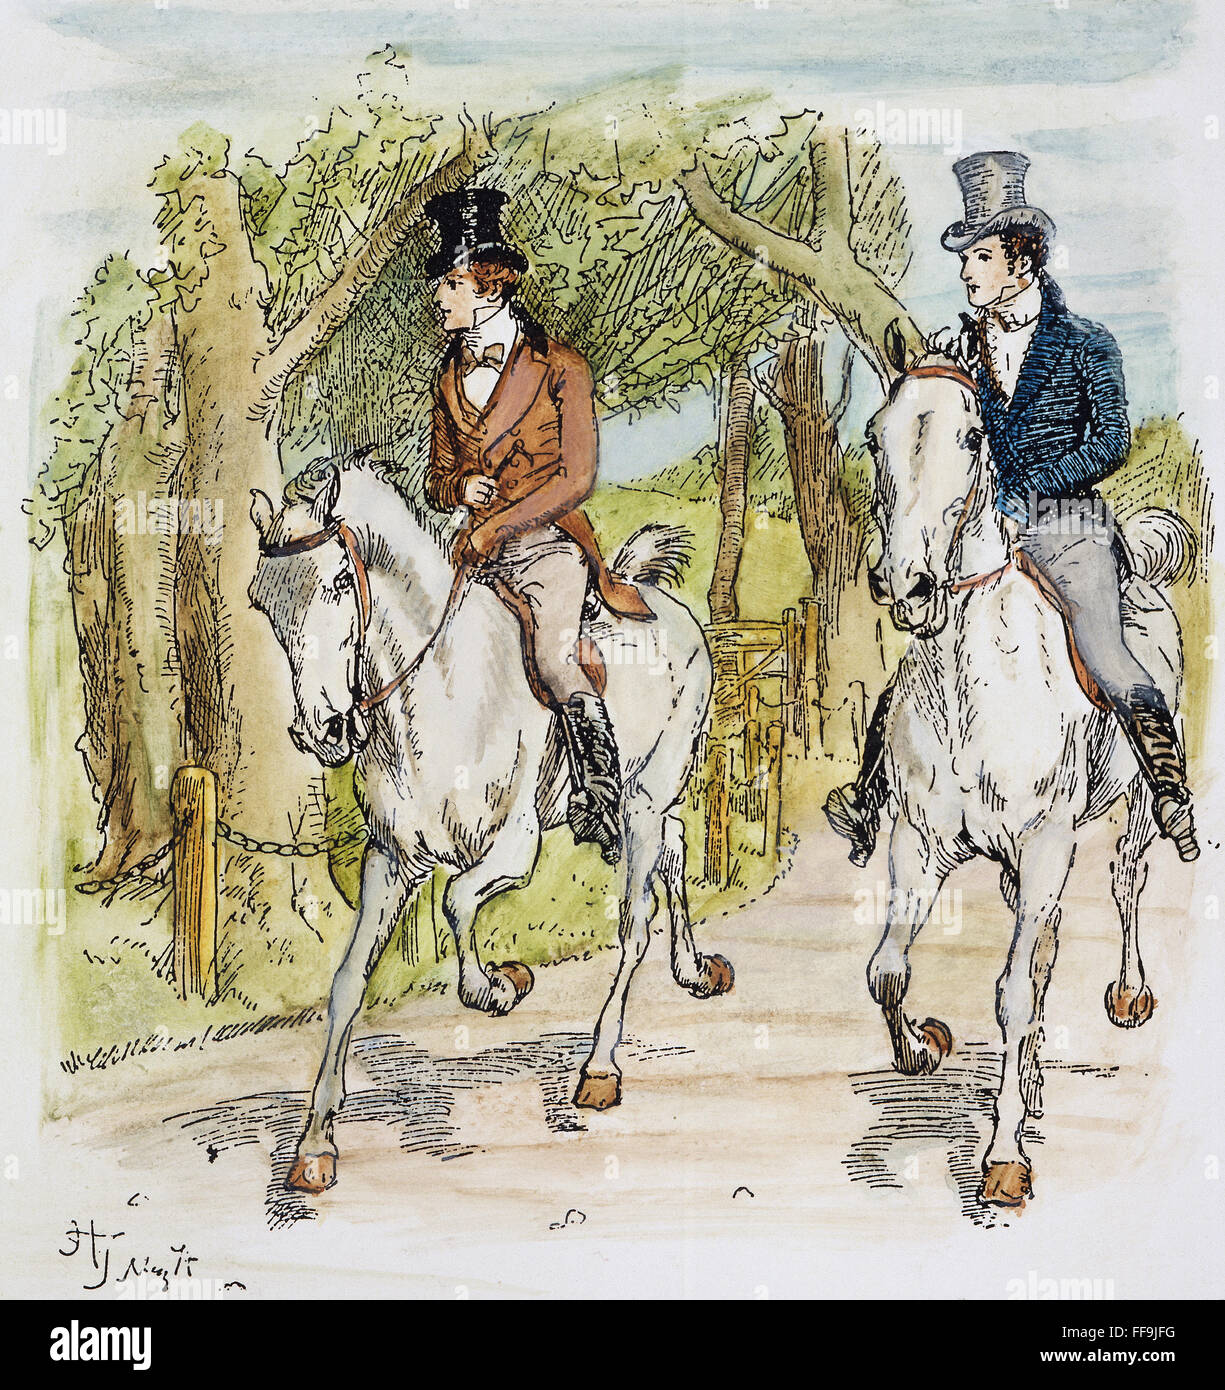 JANE AUSTEN: ILLUSTRATION. /nMister Bingley and Mr. Darcy riding. Illustration by Hugh Thomson for an 1894 edition of Jane Austen's novel 'Pride and Prejudice,' first published in 1813. Stock Photo